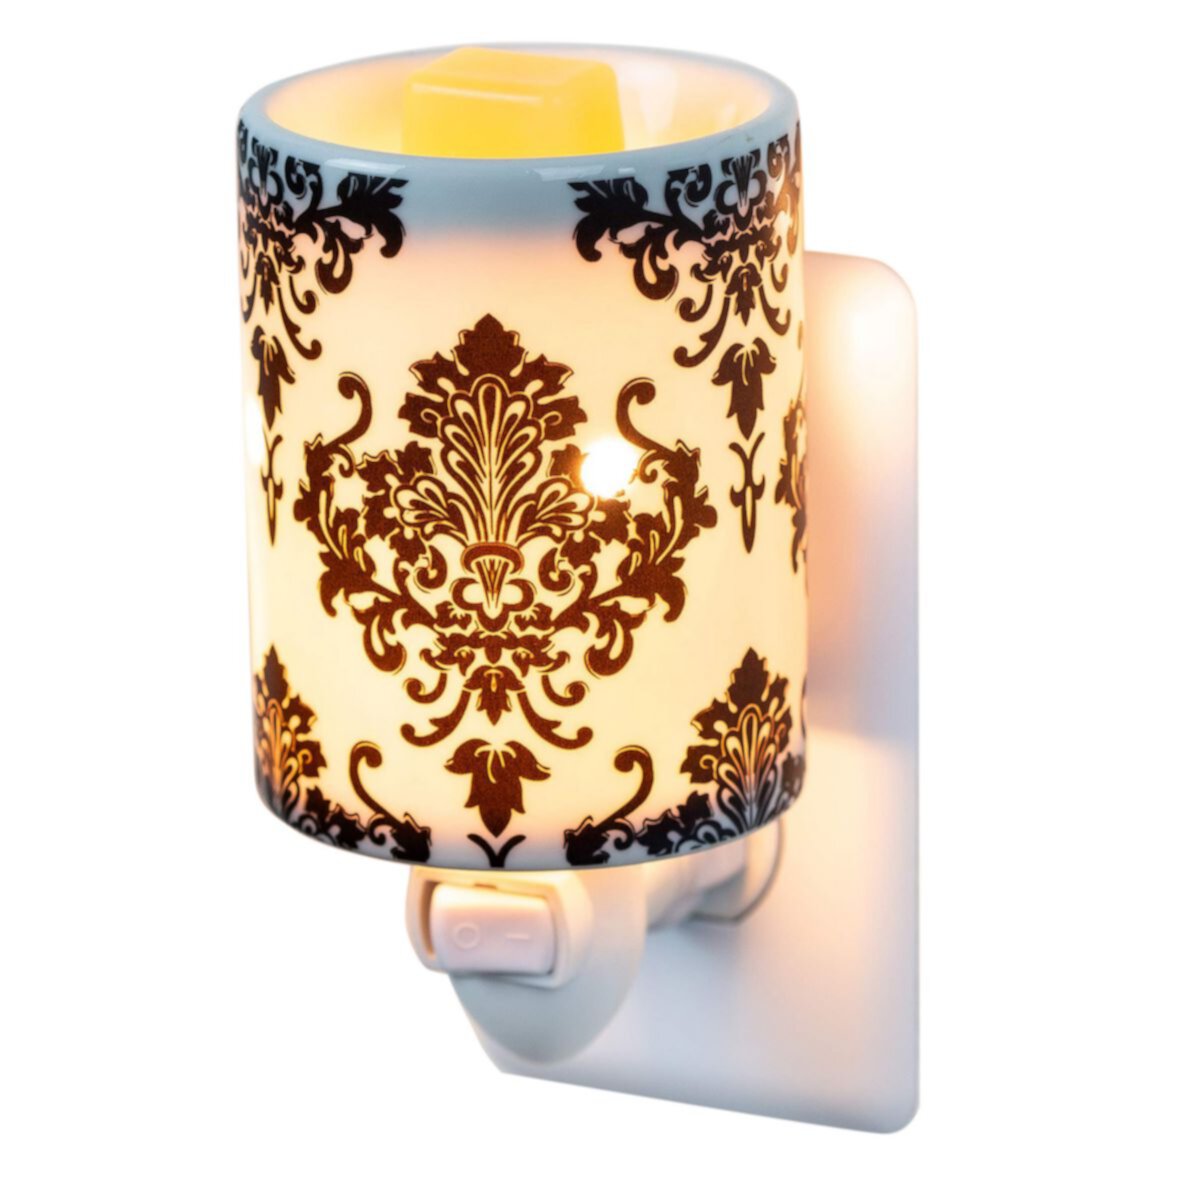 Electric Wax Warmer For Scented Wax, Essential Oils, Candle Melts & Tarts Home Fragrance Night Light Dawhud Direct